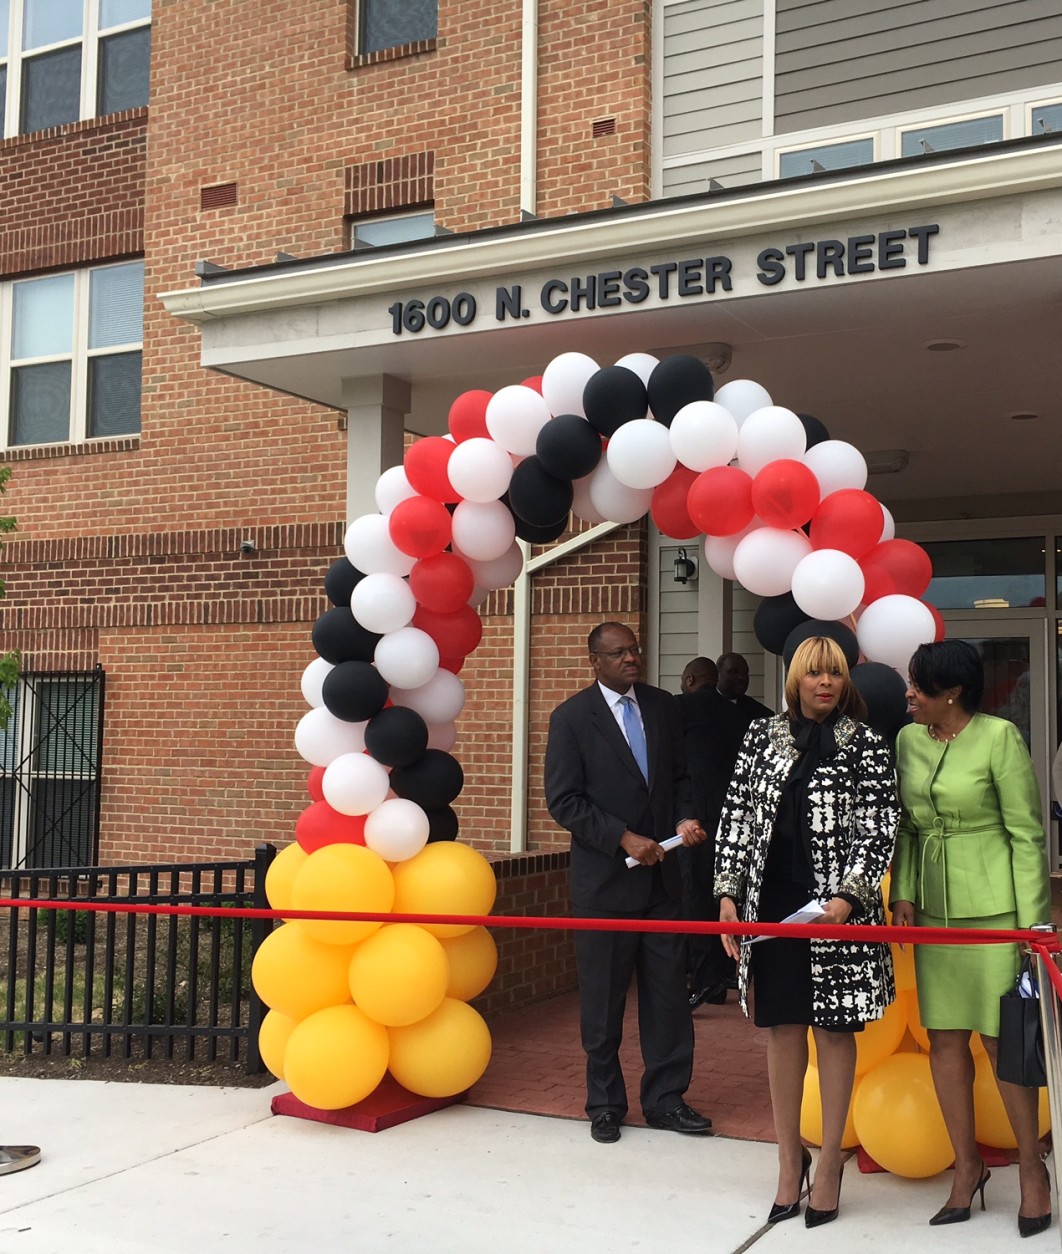 One year after the Baltimore riots, the entrance to the Mary Harvin Transformation Center was festooned with an archway of balloons, and Maryland Gov. Larry Hogan was among the dignitaries who attended the ribbon-cutting ceremony. (WTOP/Kate Ryan)